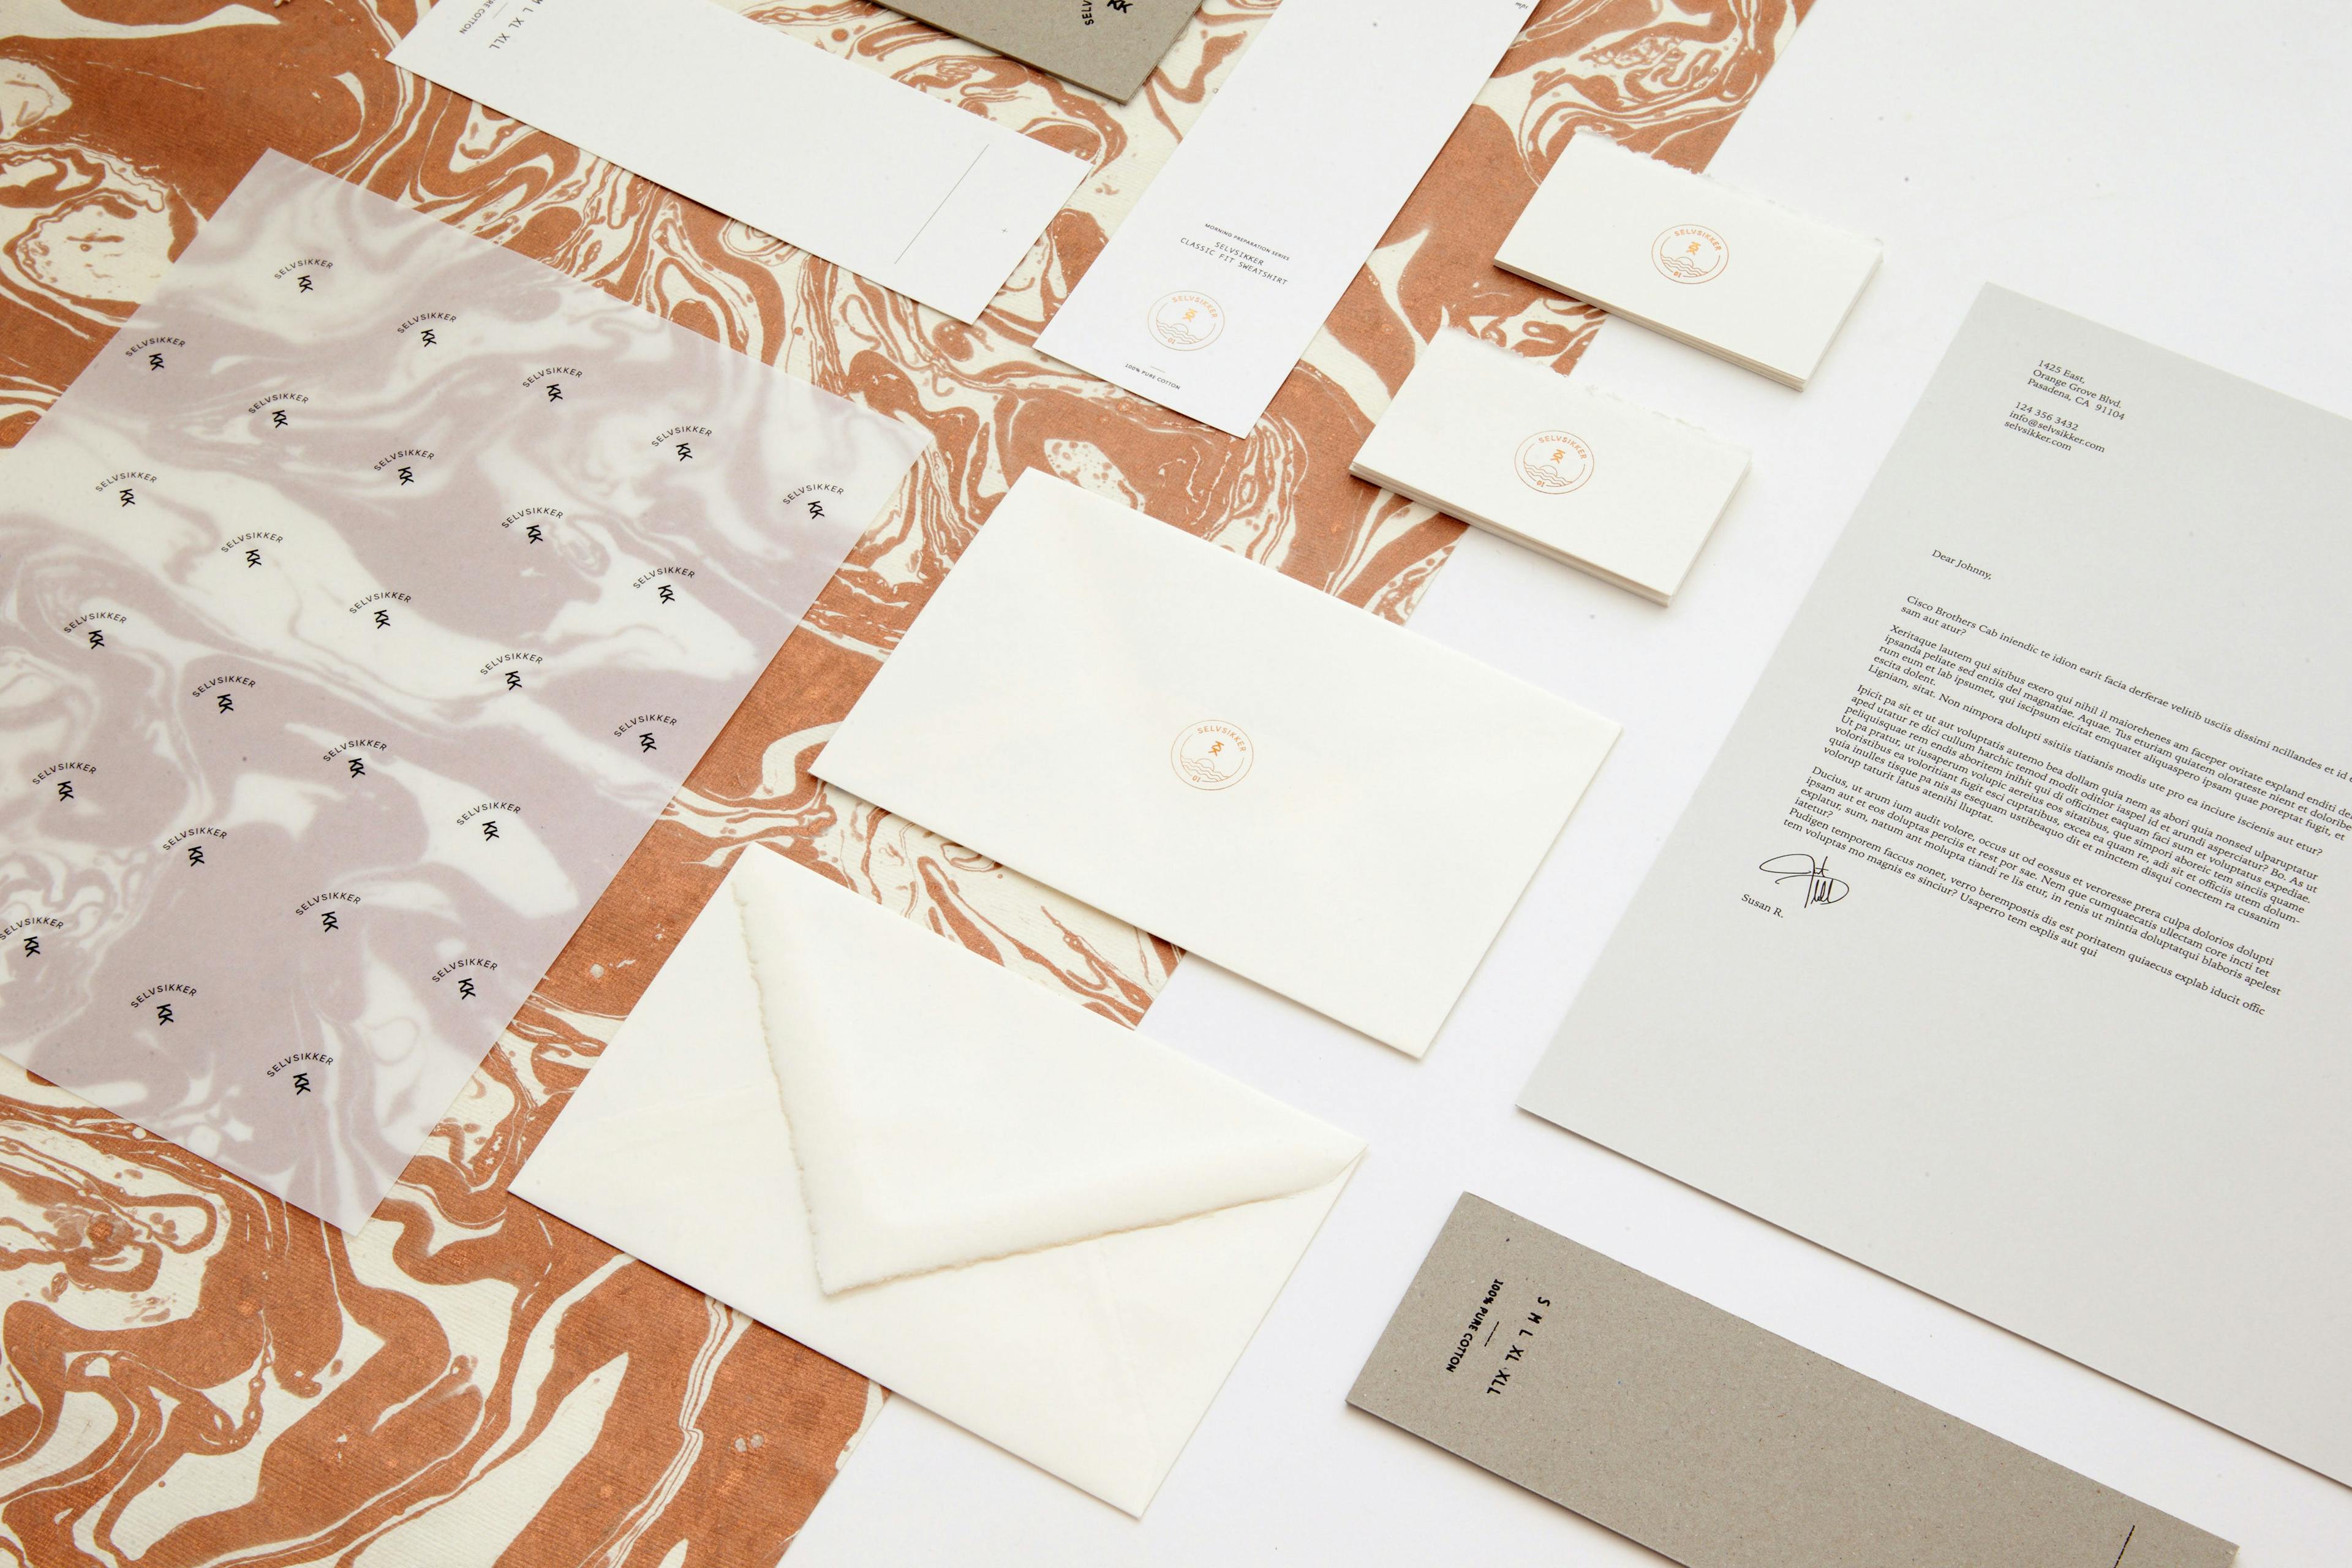 an image of print design process materials arranged in a grid pattern, including envelopes, stickers, and various paper materials.